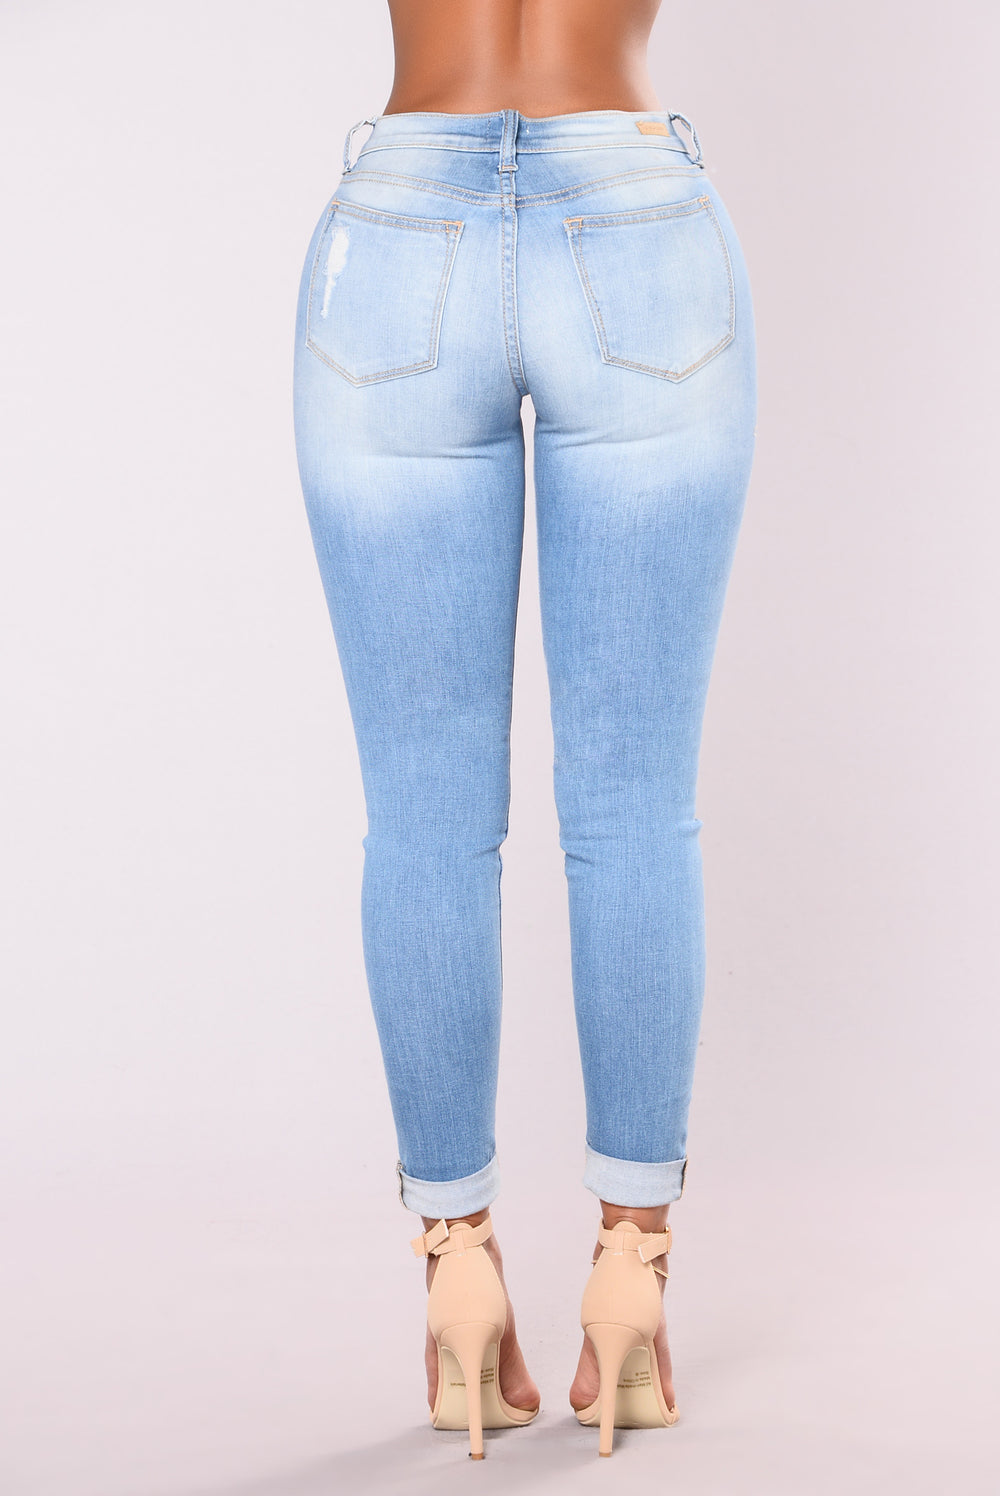 High waisted stretch jeans womens